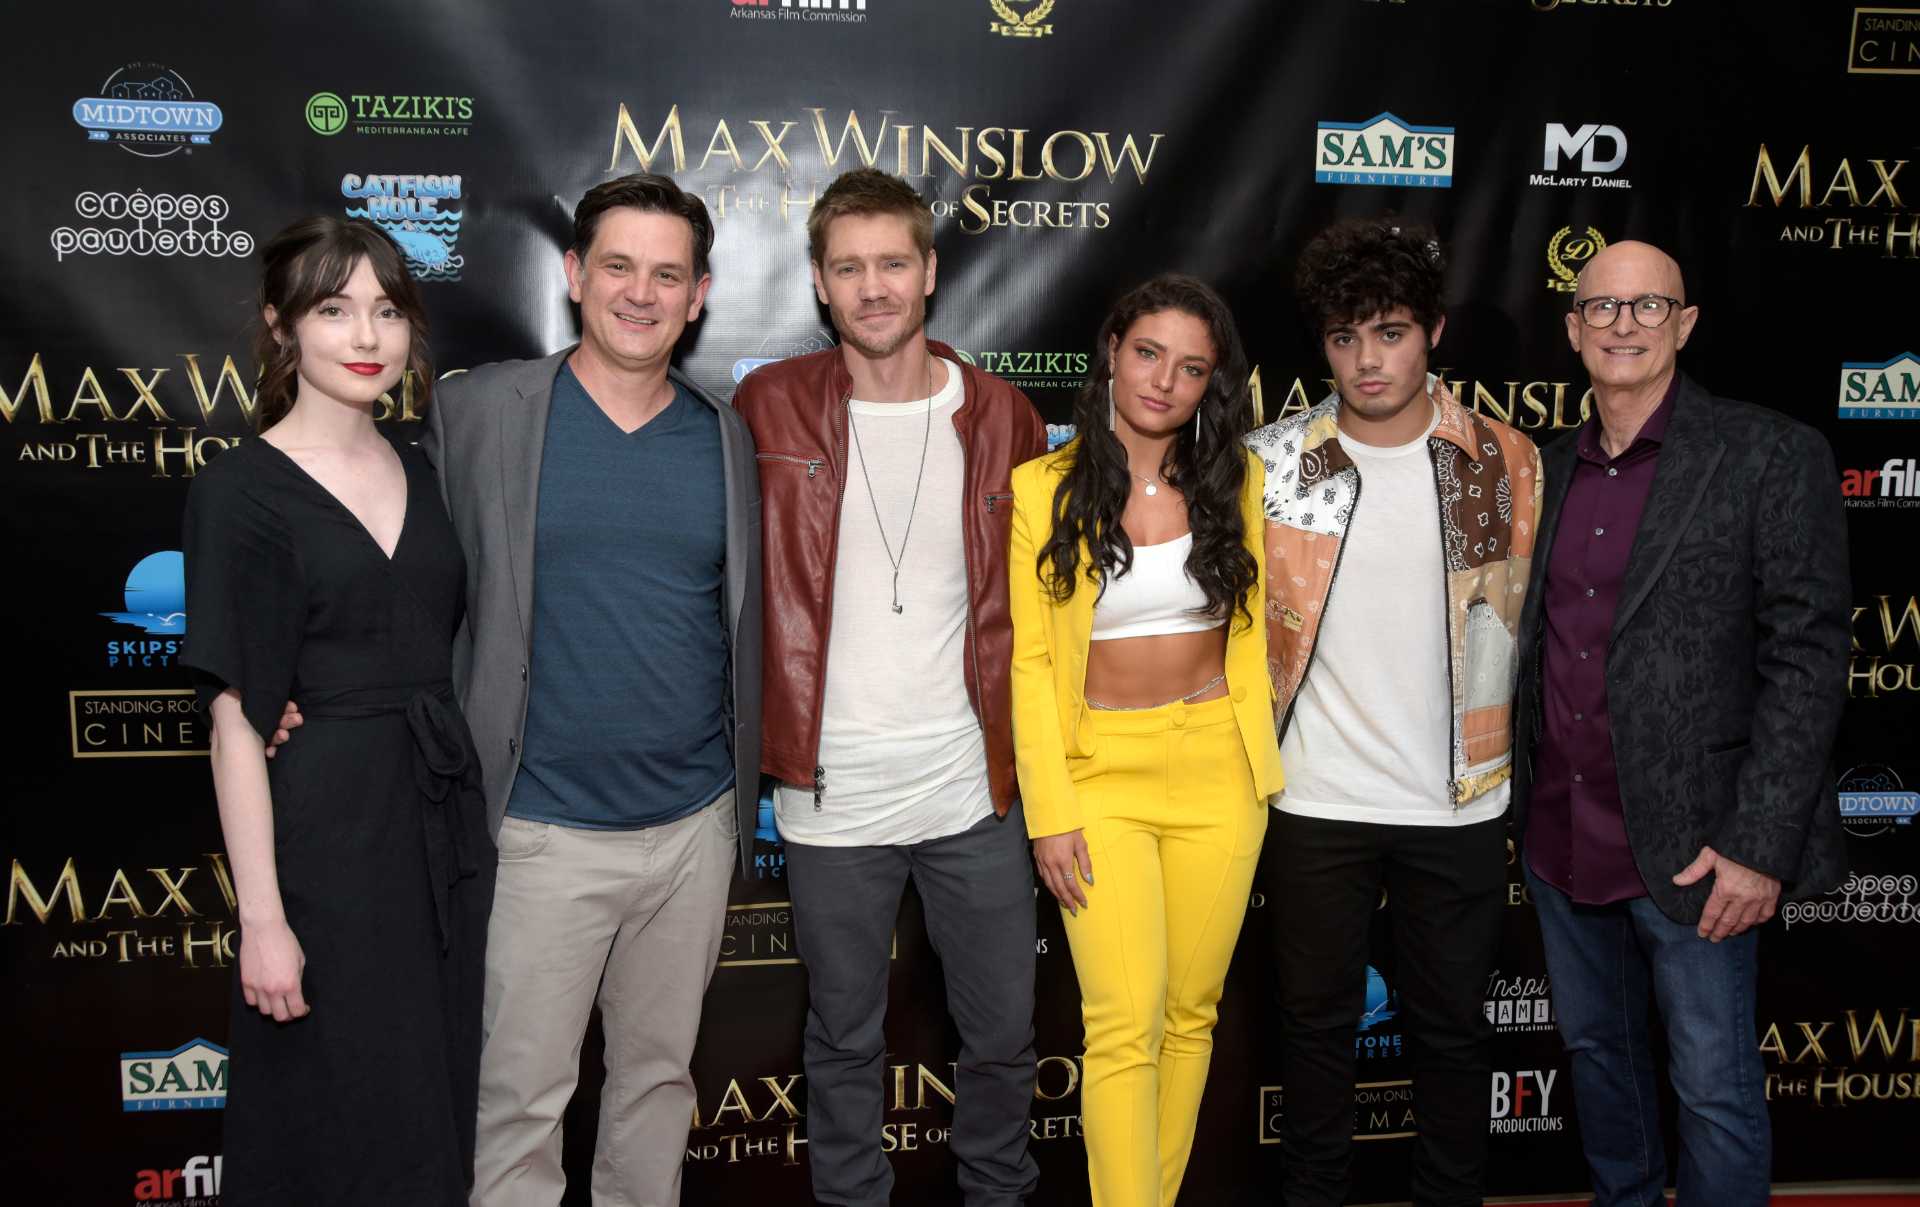 Sydne Mikelle (far left) at a screening of "Max Winslow And The House of Secrets" | Michael Tullberg/Getty Images